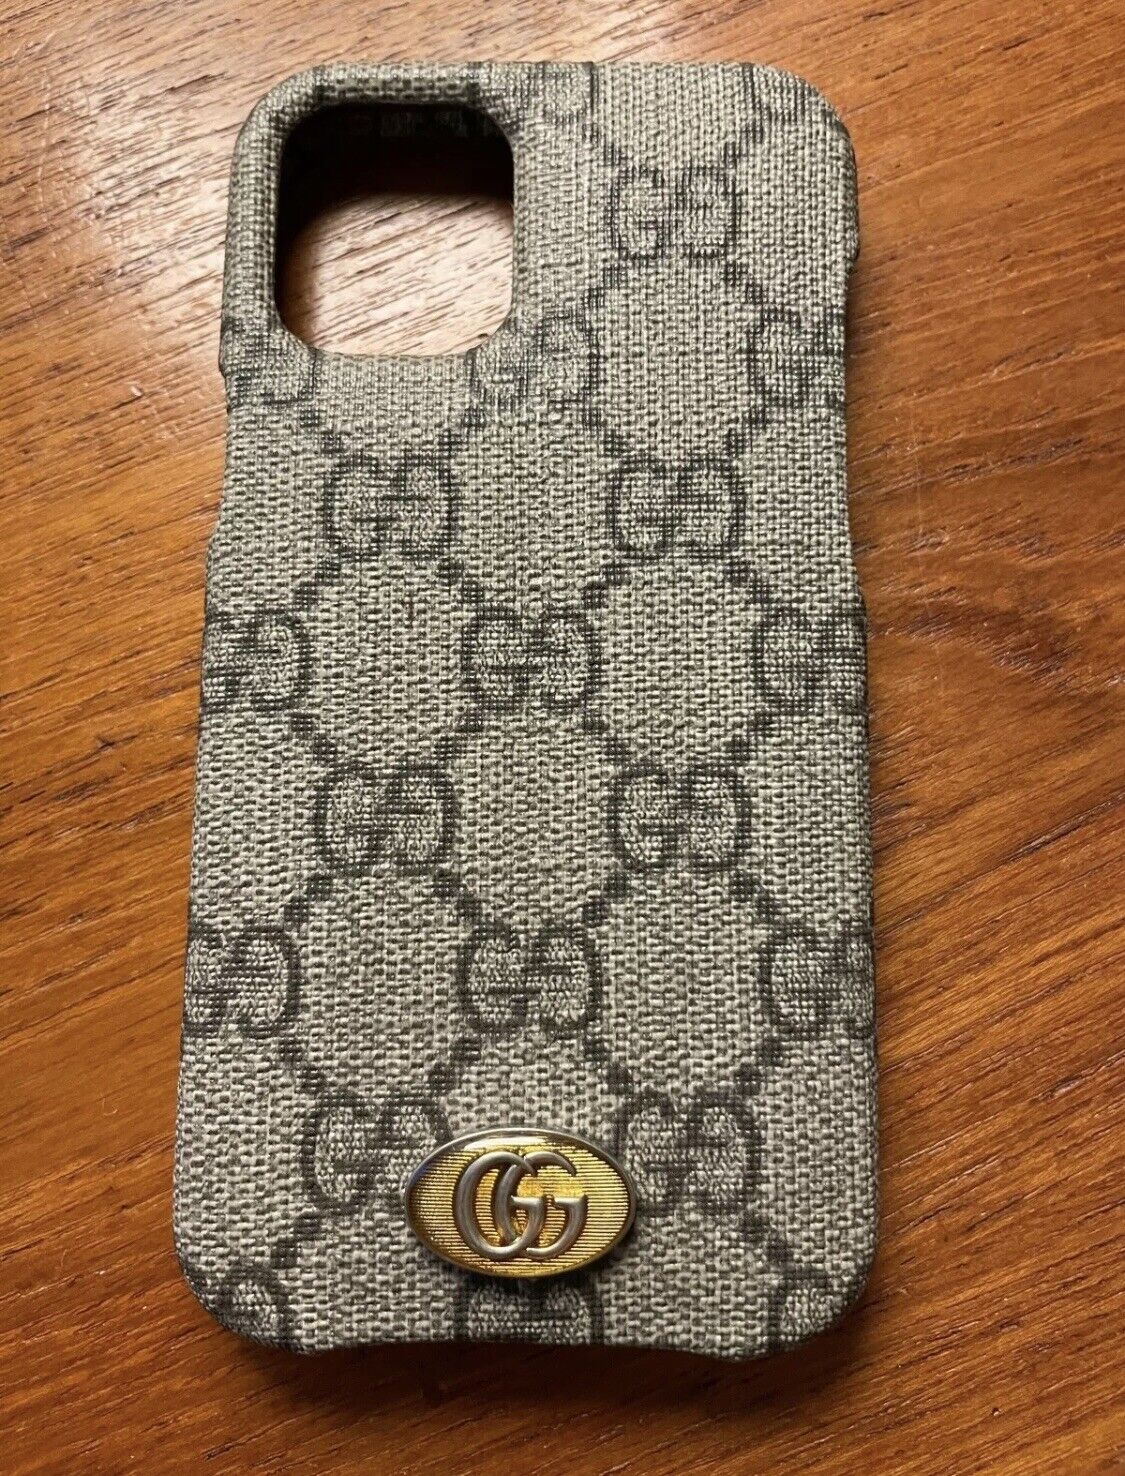 100% AUTHENTIC GUCCI OPHIDIA GG LOGO IPHONE CASE 12 & 13 MINI ITALY FREE SHIP